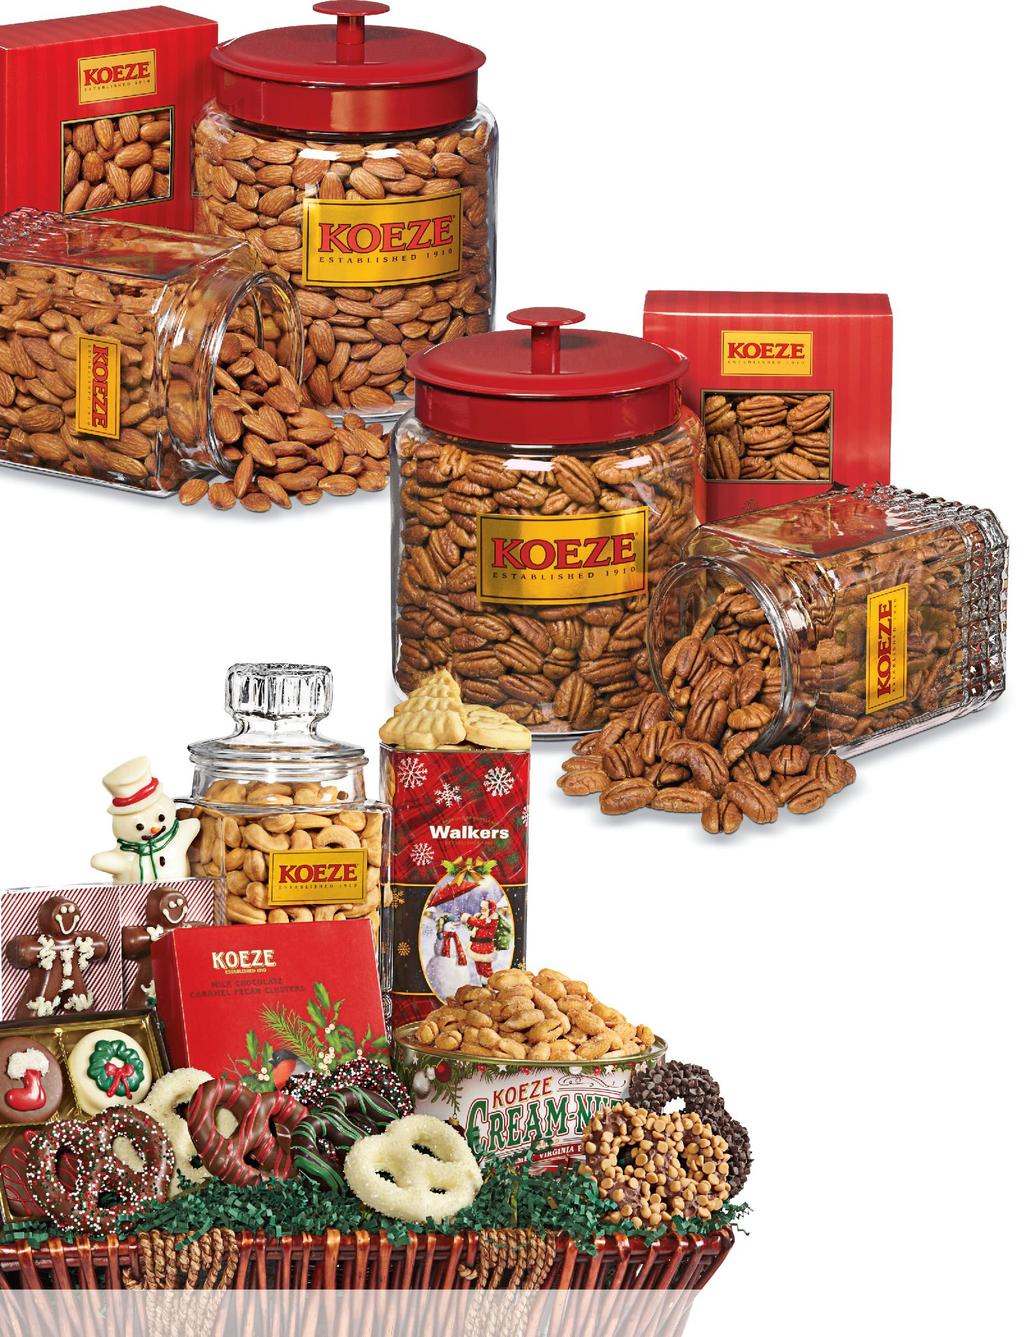 ALMONDS, PECANS KOEZE S ROASTED ALMONDS For decades, our carefully roasted and salted California almonds have co-starred with the cashews in our mixed nuts.